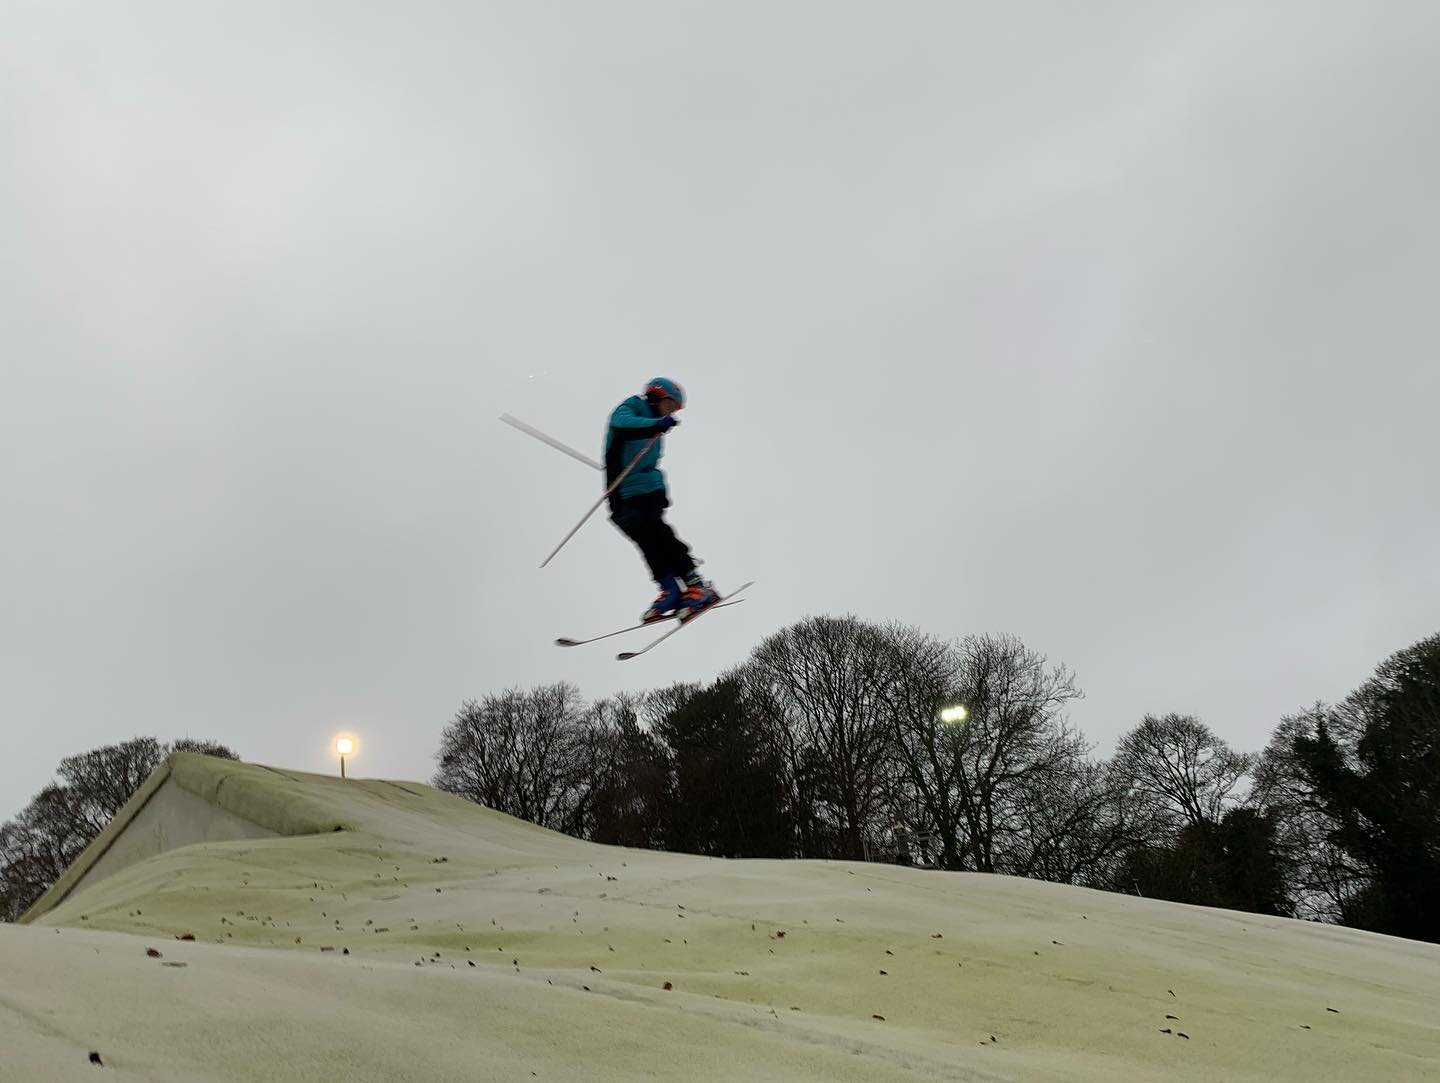 That&rsquo;s a wrap! Many thanks to all who attended our final camp of 2020 at @norfolksnowsportsclub ⛷ Despite the wet conditions, all athletes pushed through making some big changes whilst having a wicked time! Stay tuned for tomorrow&rsquo;s 2020 